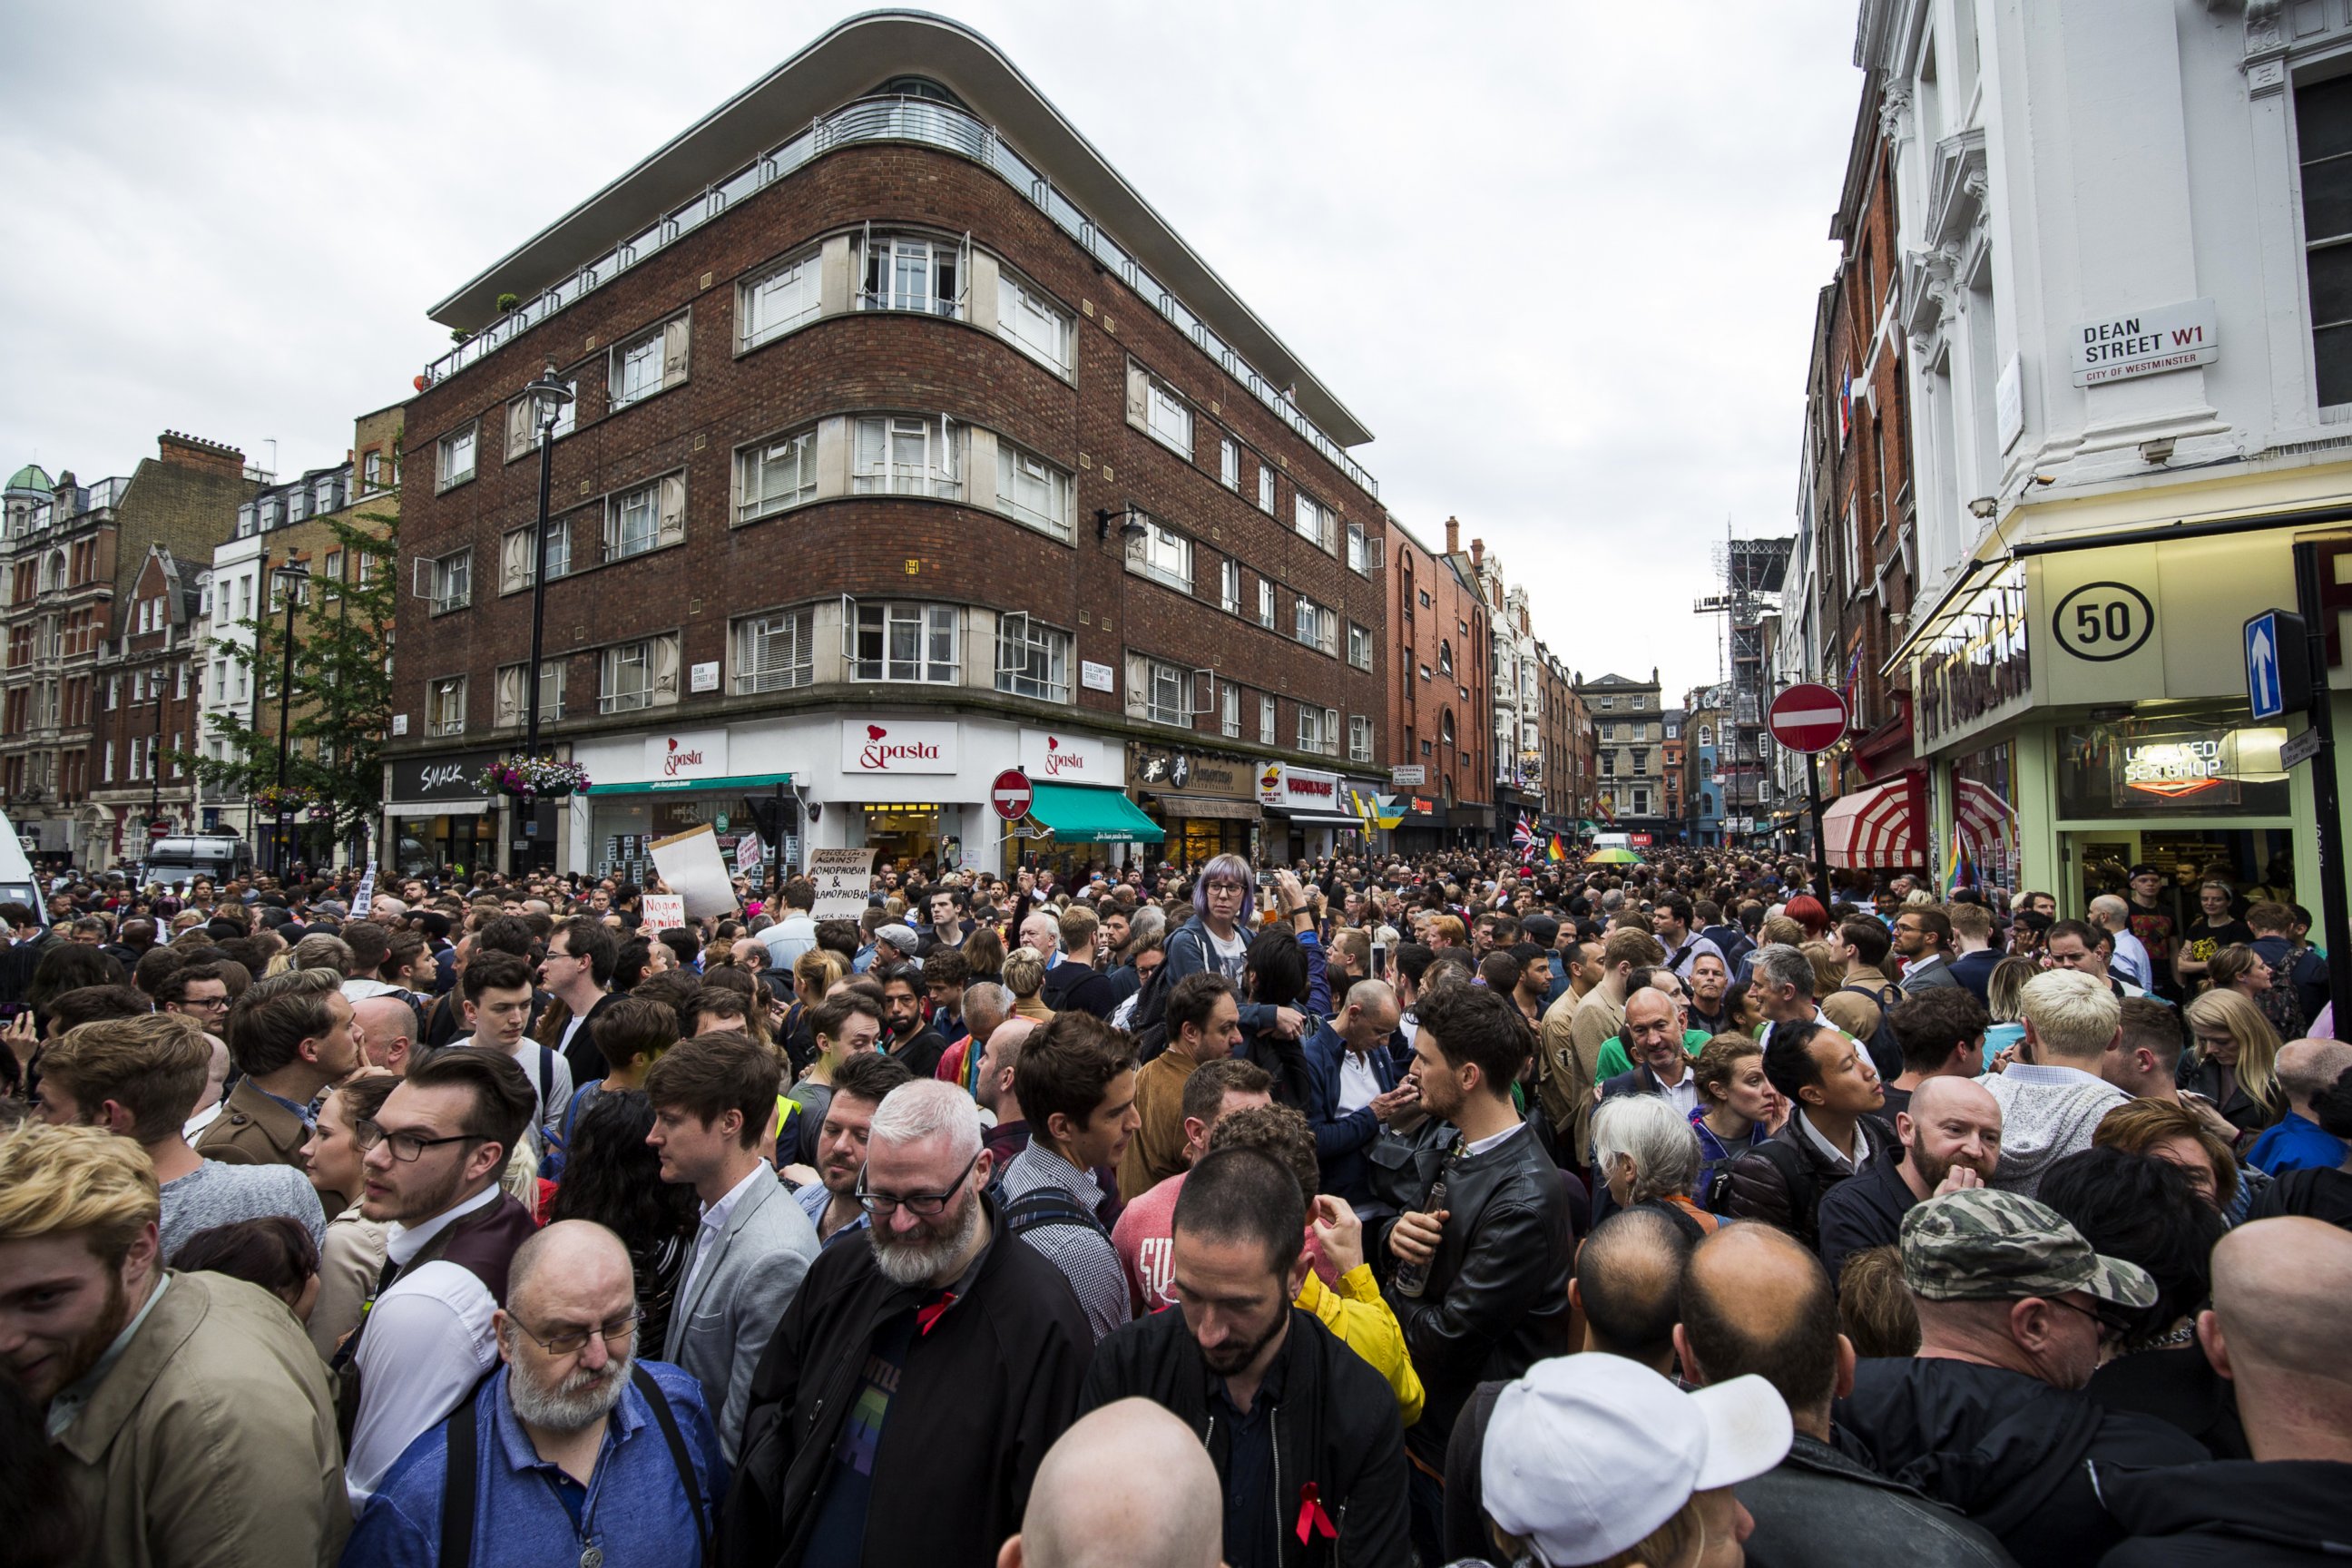 PHOTO: Hundreds attend a vigil for the victims of the Orlando nightclub shooting, outside the Admiral Duncan pub on Old Compton Street, Soho, June 13, 2016, in London.